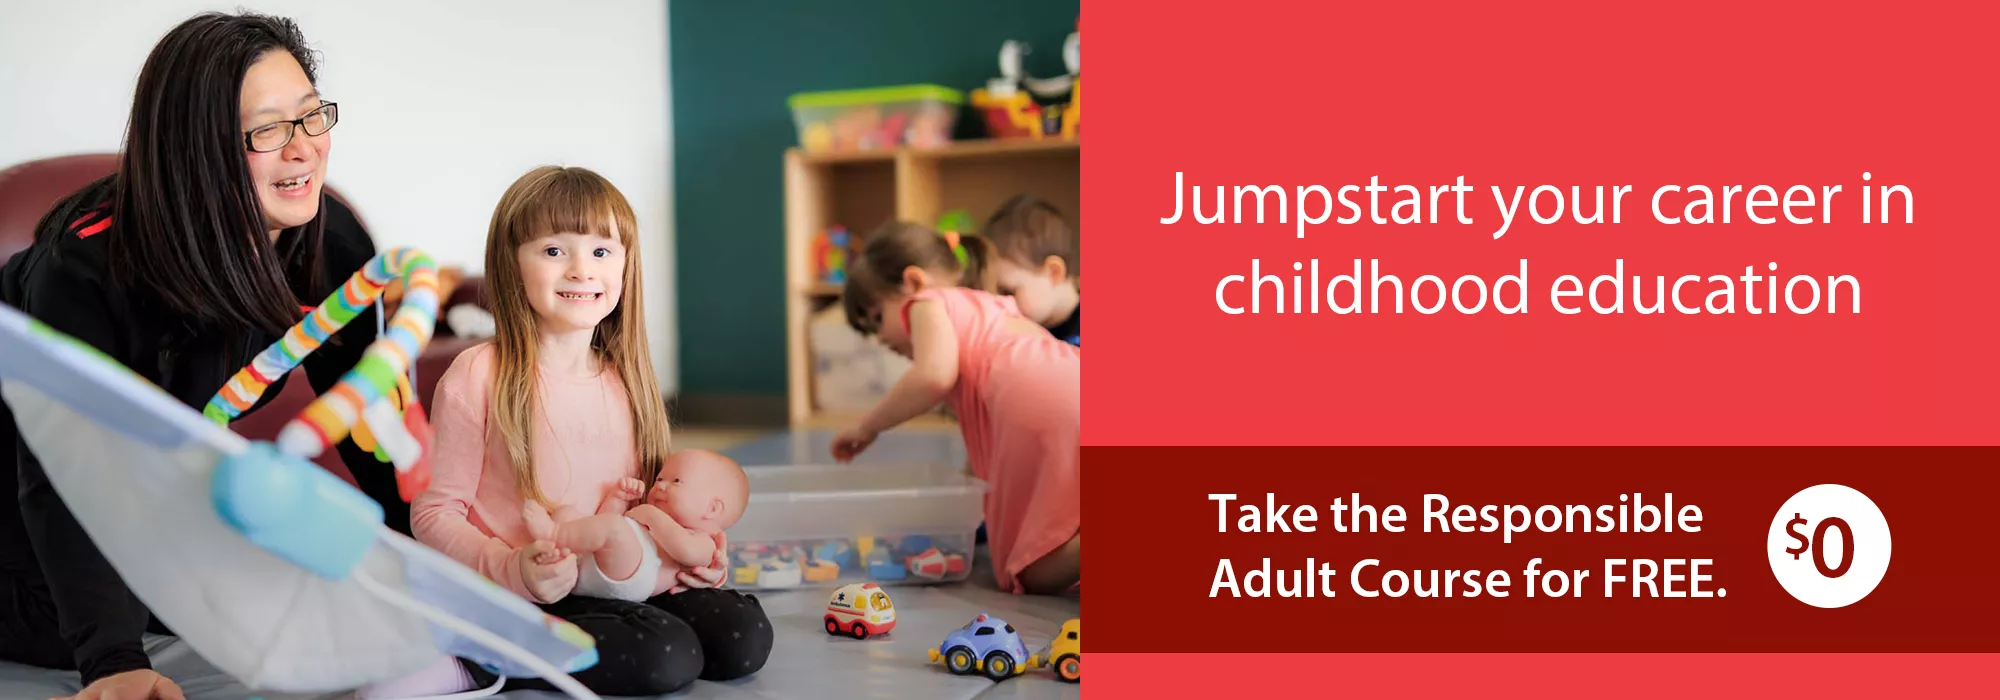 Jumpstart your childhood education career. Take the Responsible Adult Course for free!